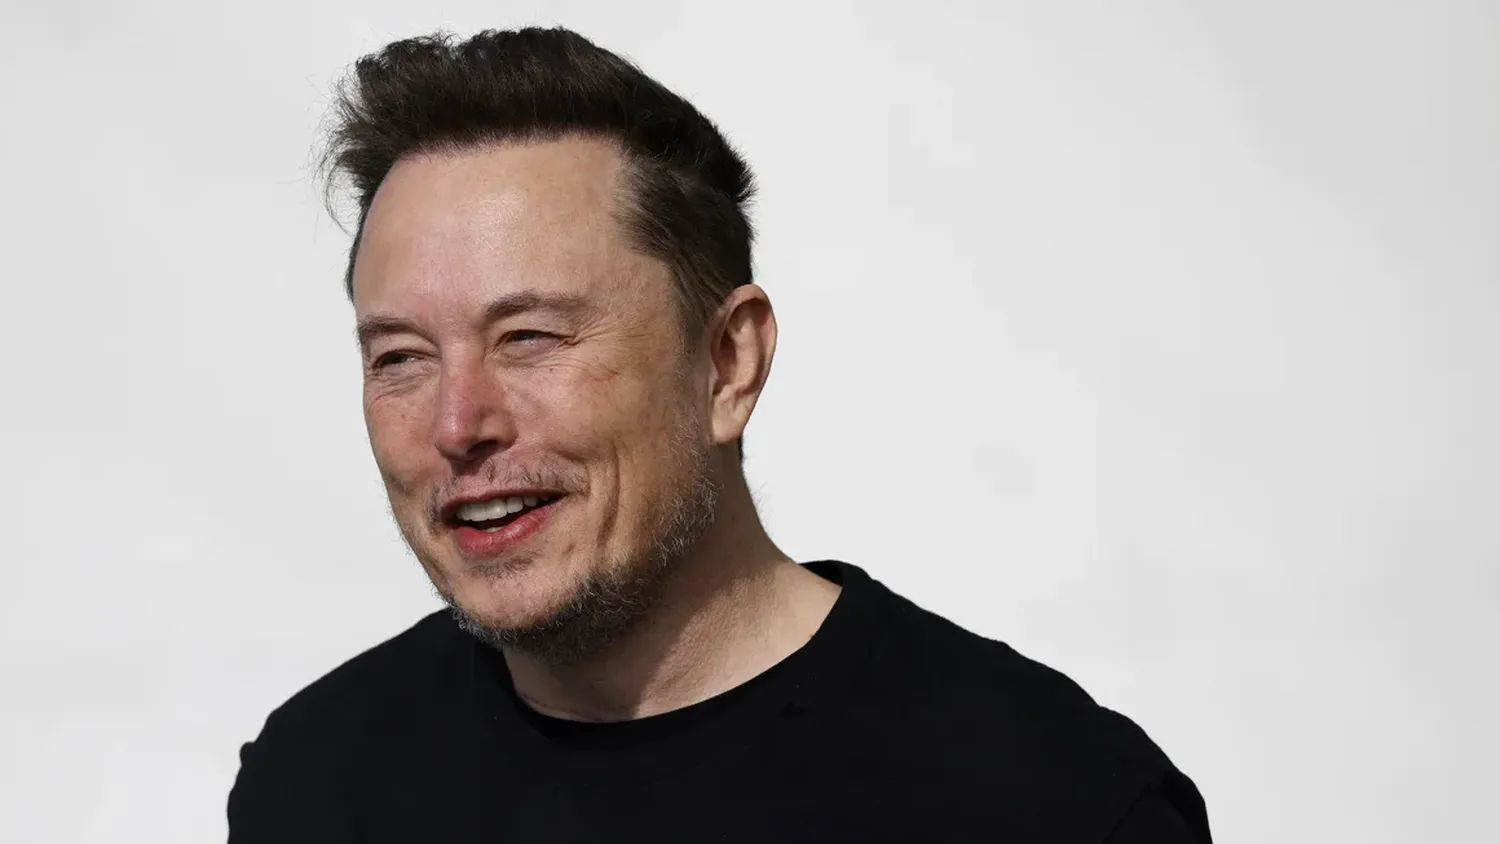 Tesla CEO Elon Musk discussed his use of the medication ketamine